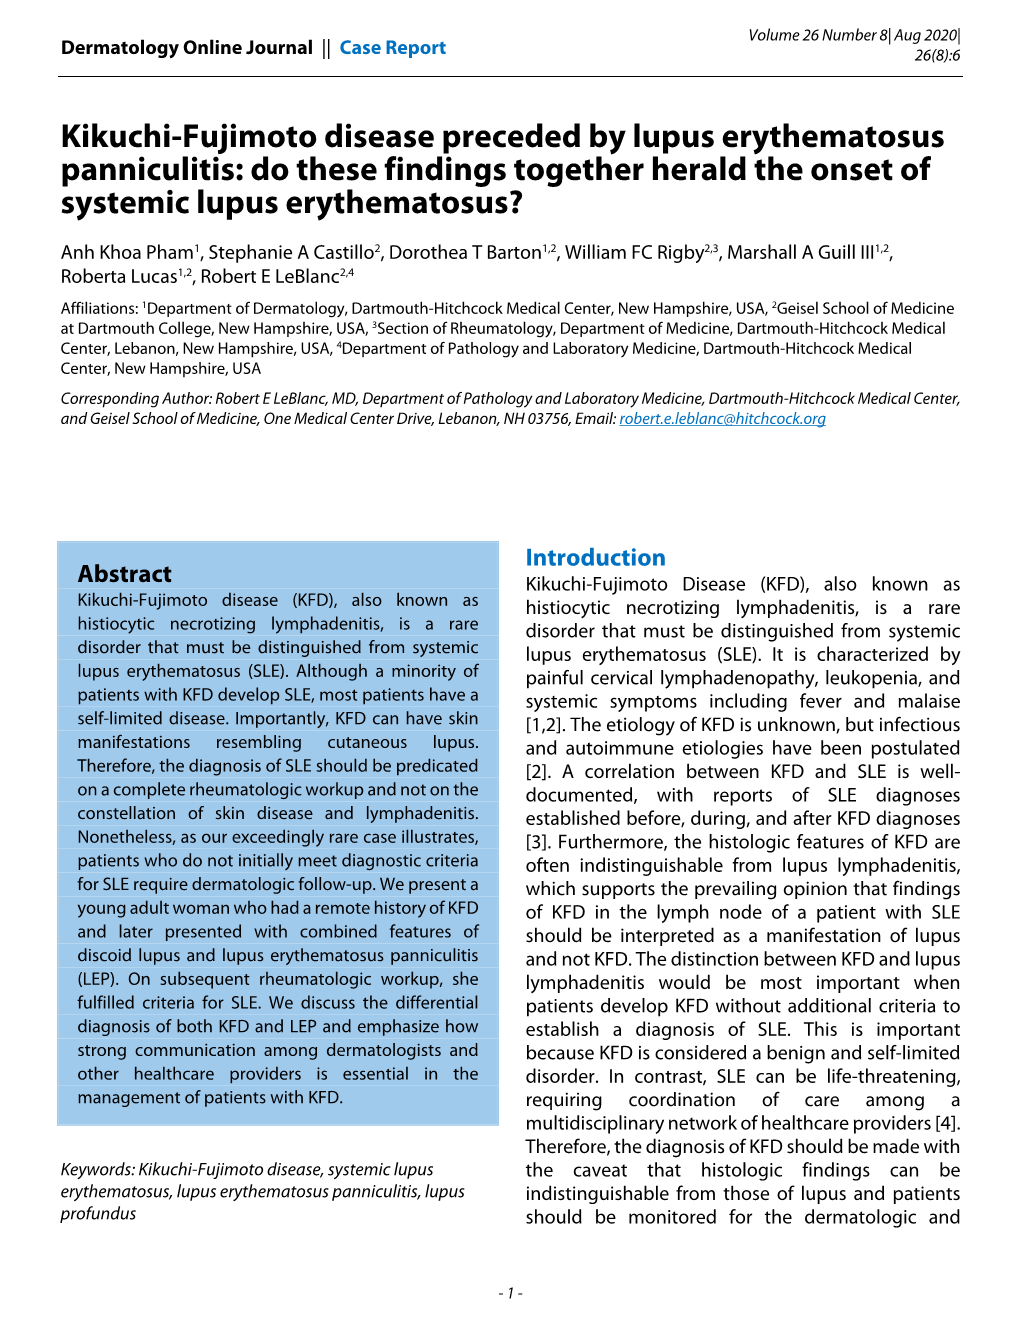 Kikuchi-Fujimoto Disease Preceded by Lupus Erythematosus Panniculitis: Do These Findings Together Herald the Onset of Systemic Lupus Erythematosus?